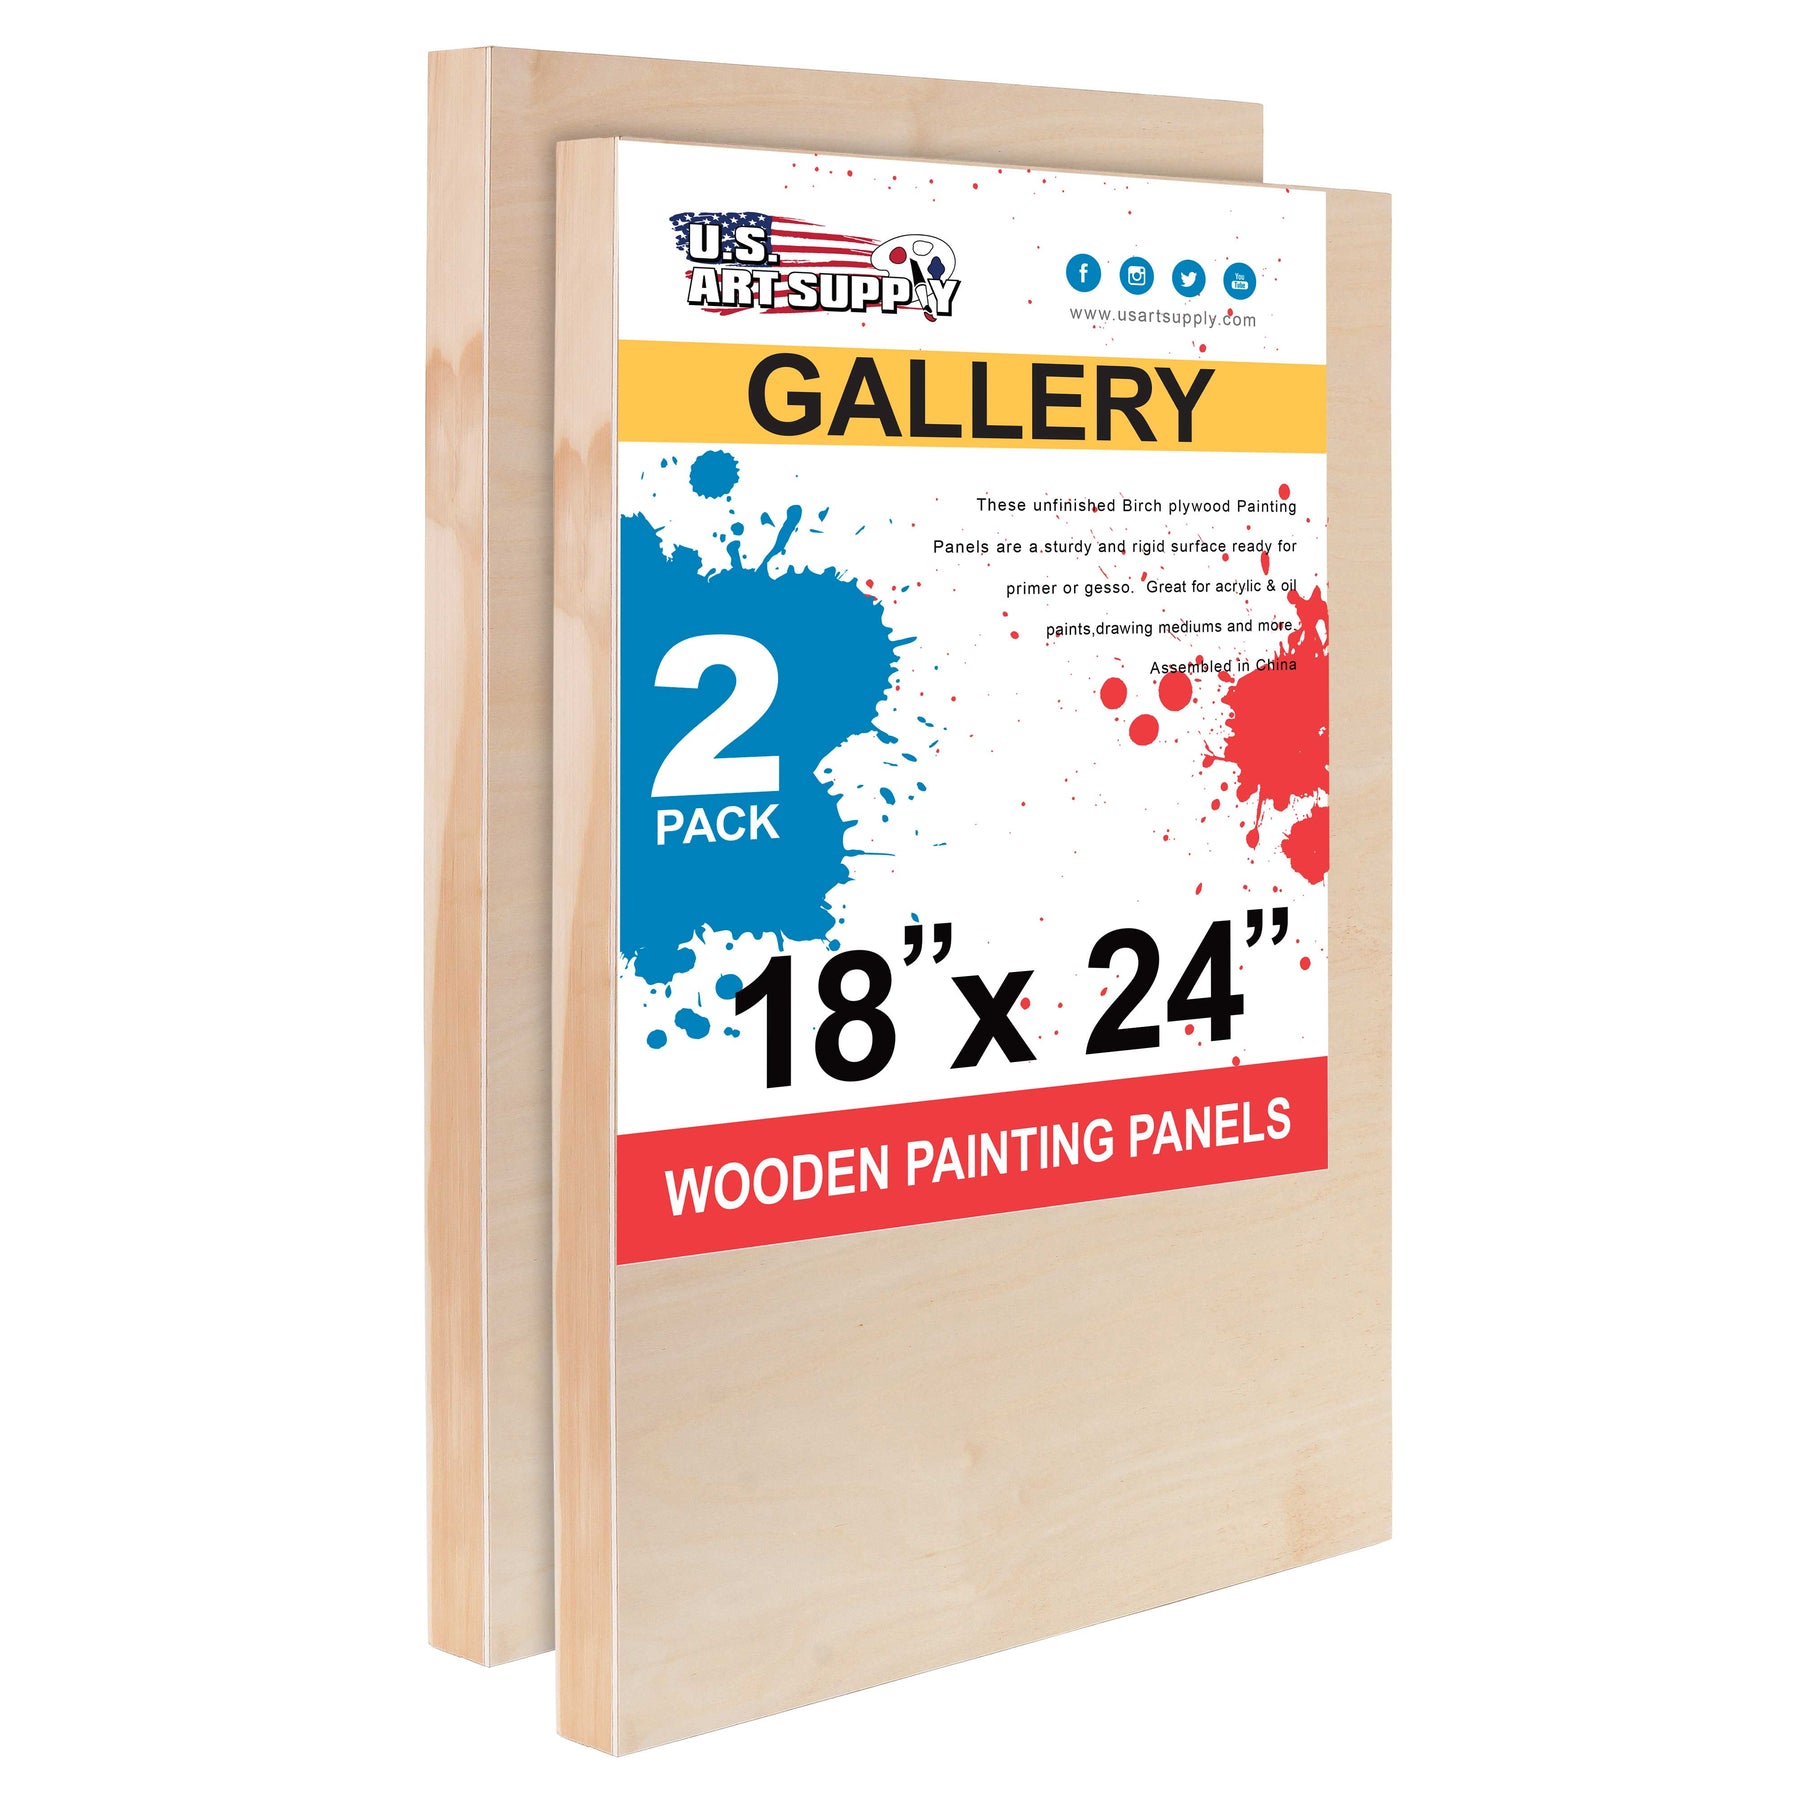 18 Pack Canvases for Painting Art Canvas Boards Canvas Panels